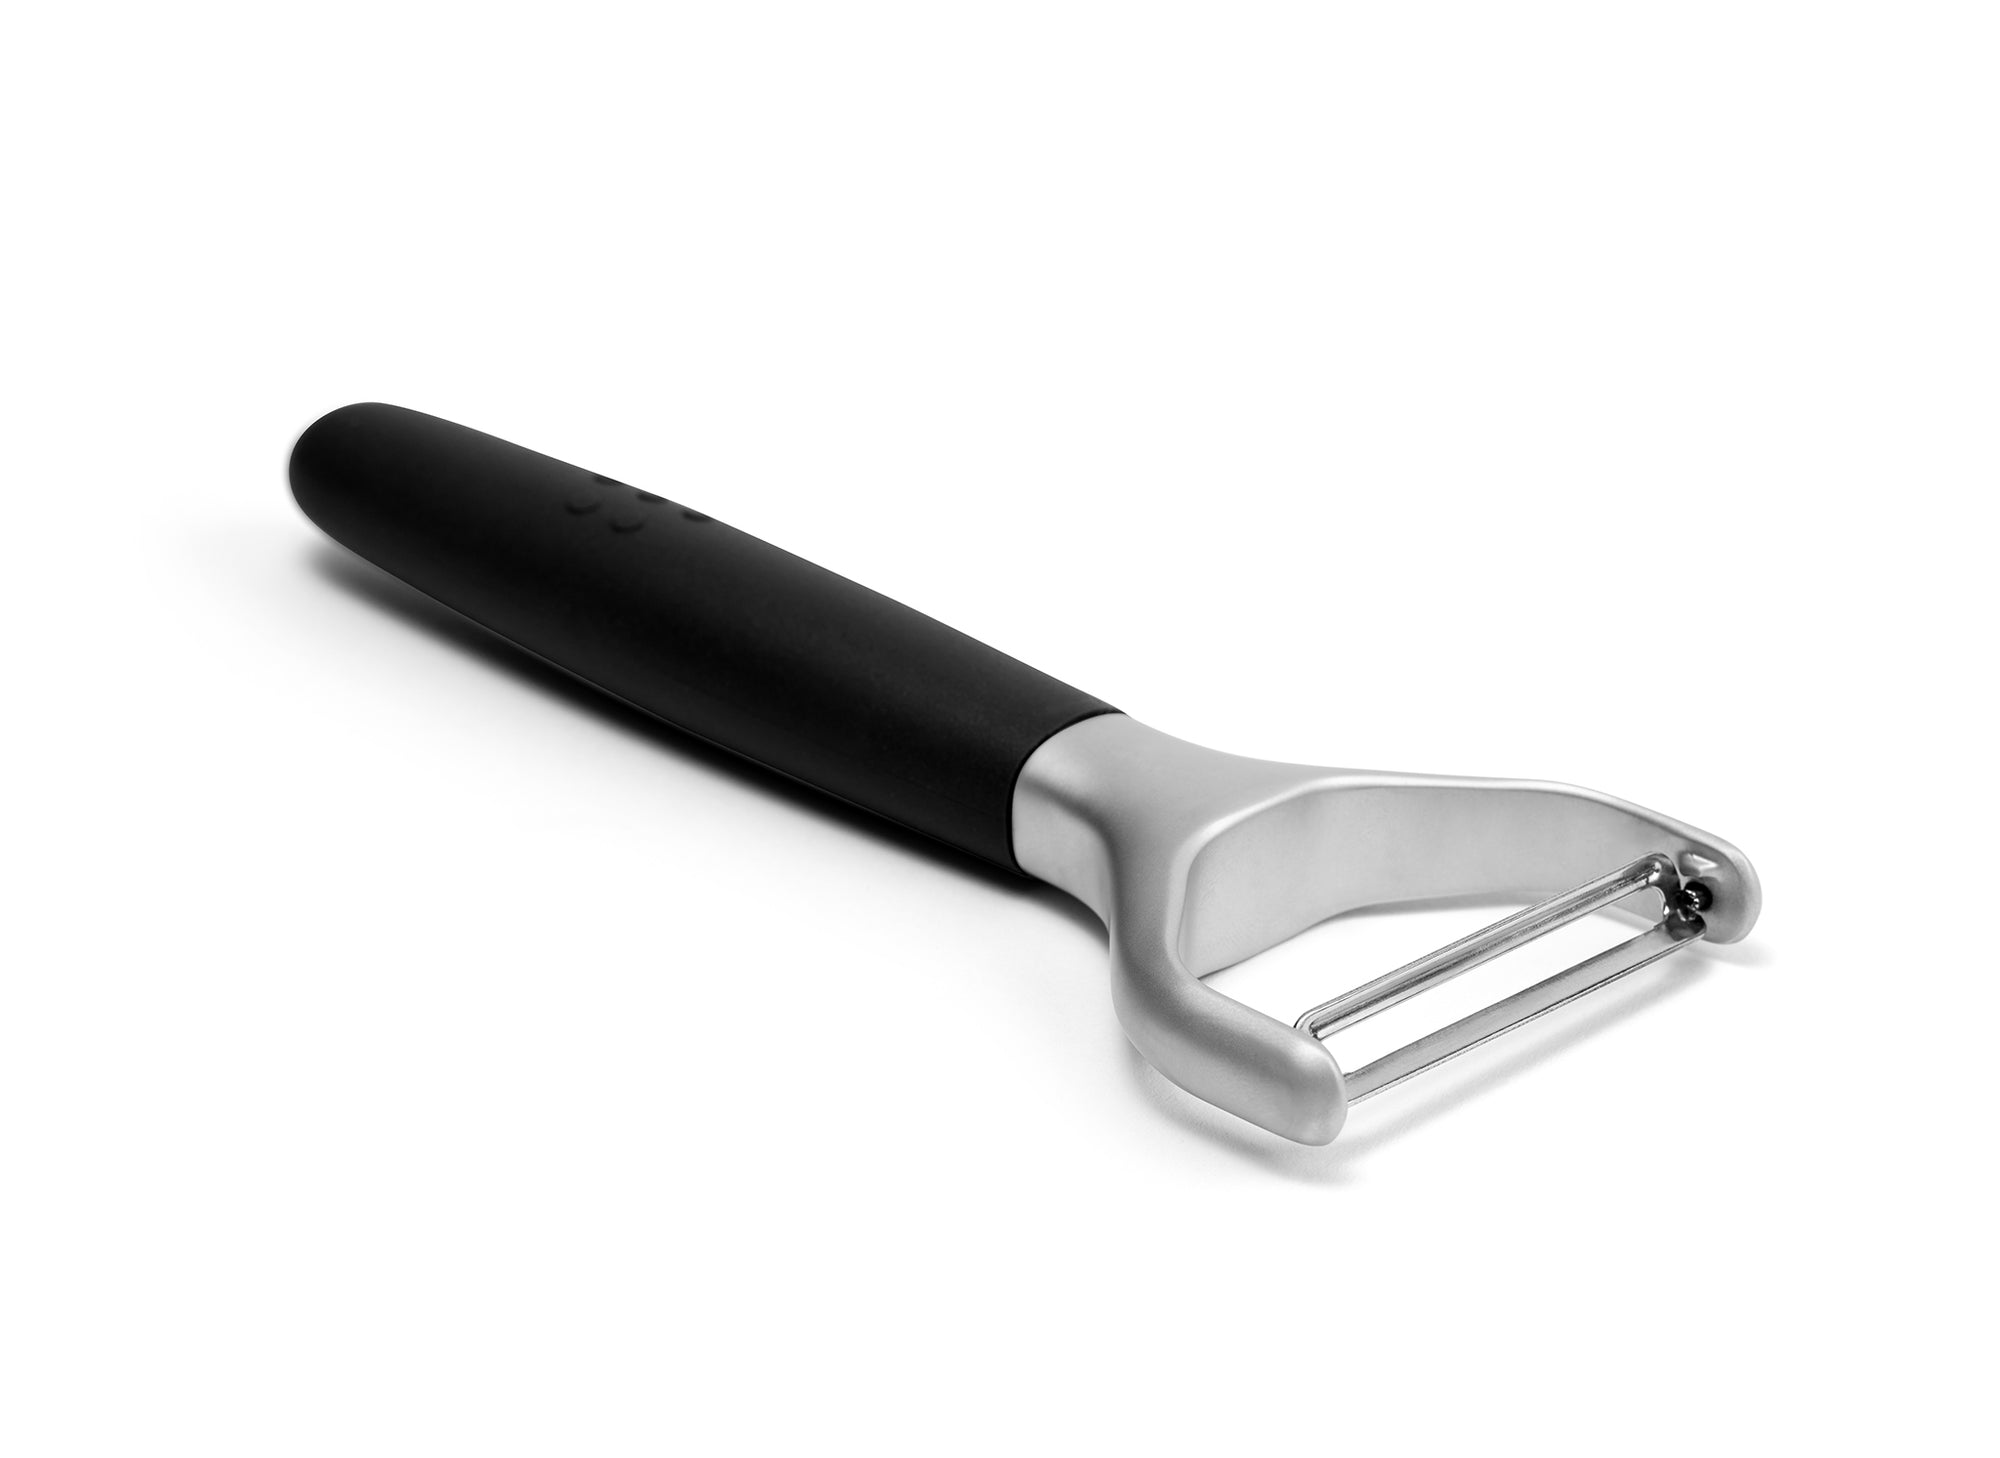 A Black Misen Peeler with silicone handle and metal Y-shaped head viewed from the side on a white background.